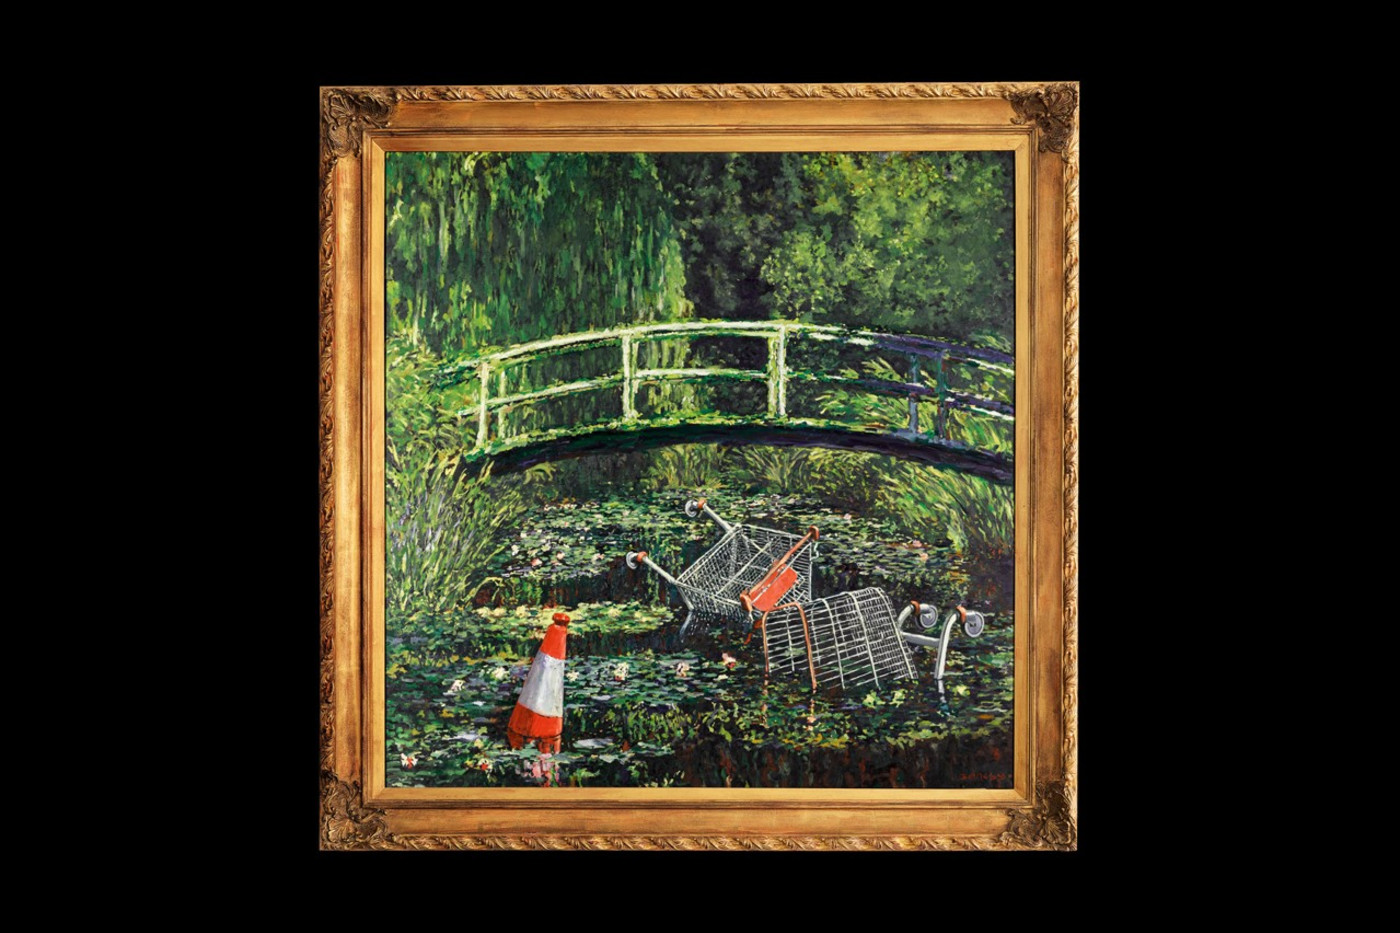 L'art. - Page 5 Banksy-show-me-the-monet-painting-sothebys-october-2020-auction-info-1